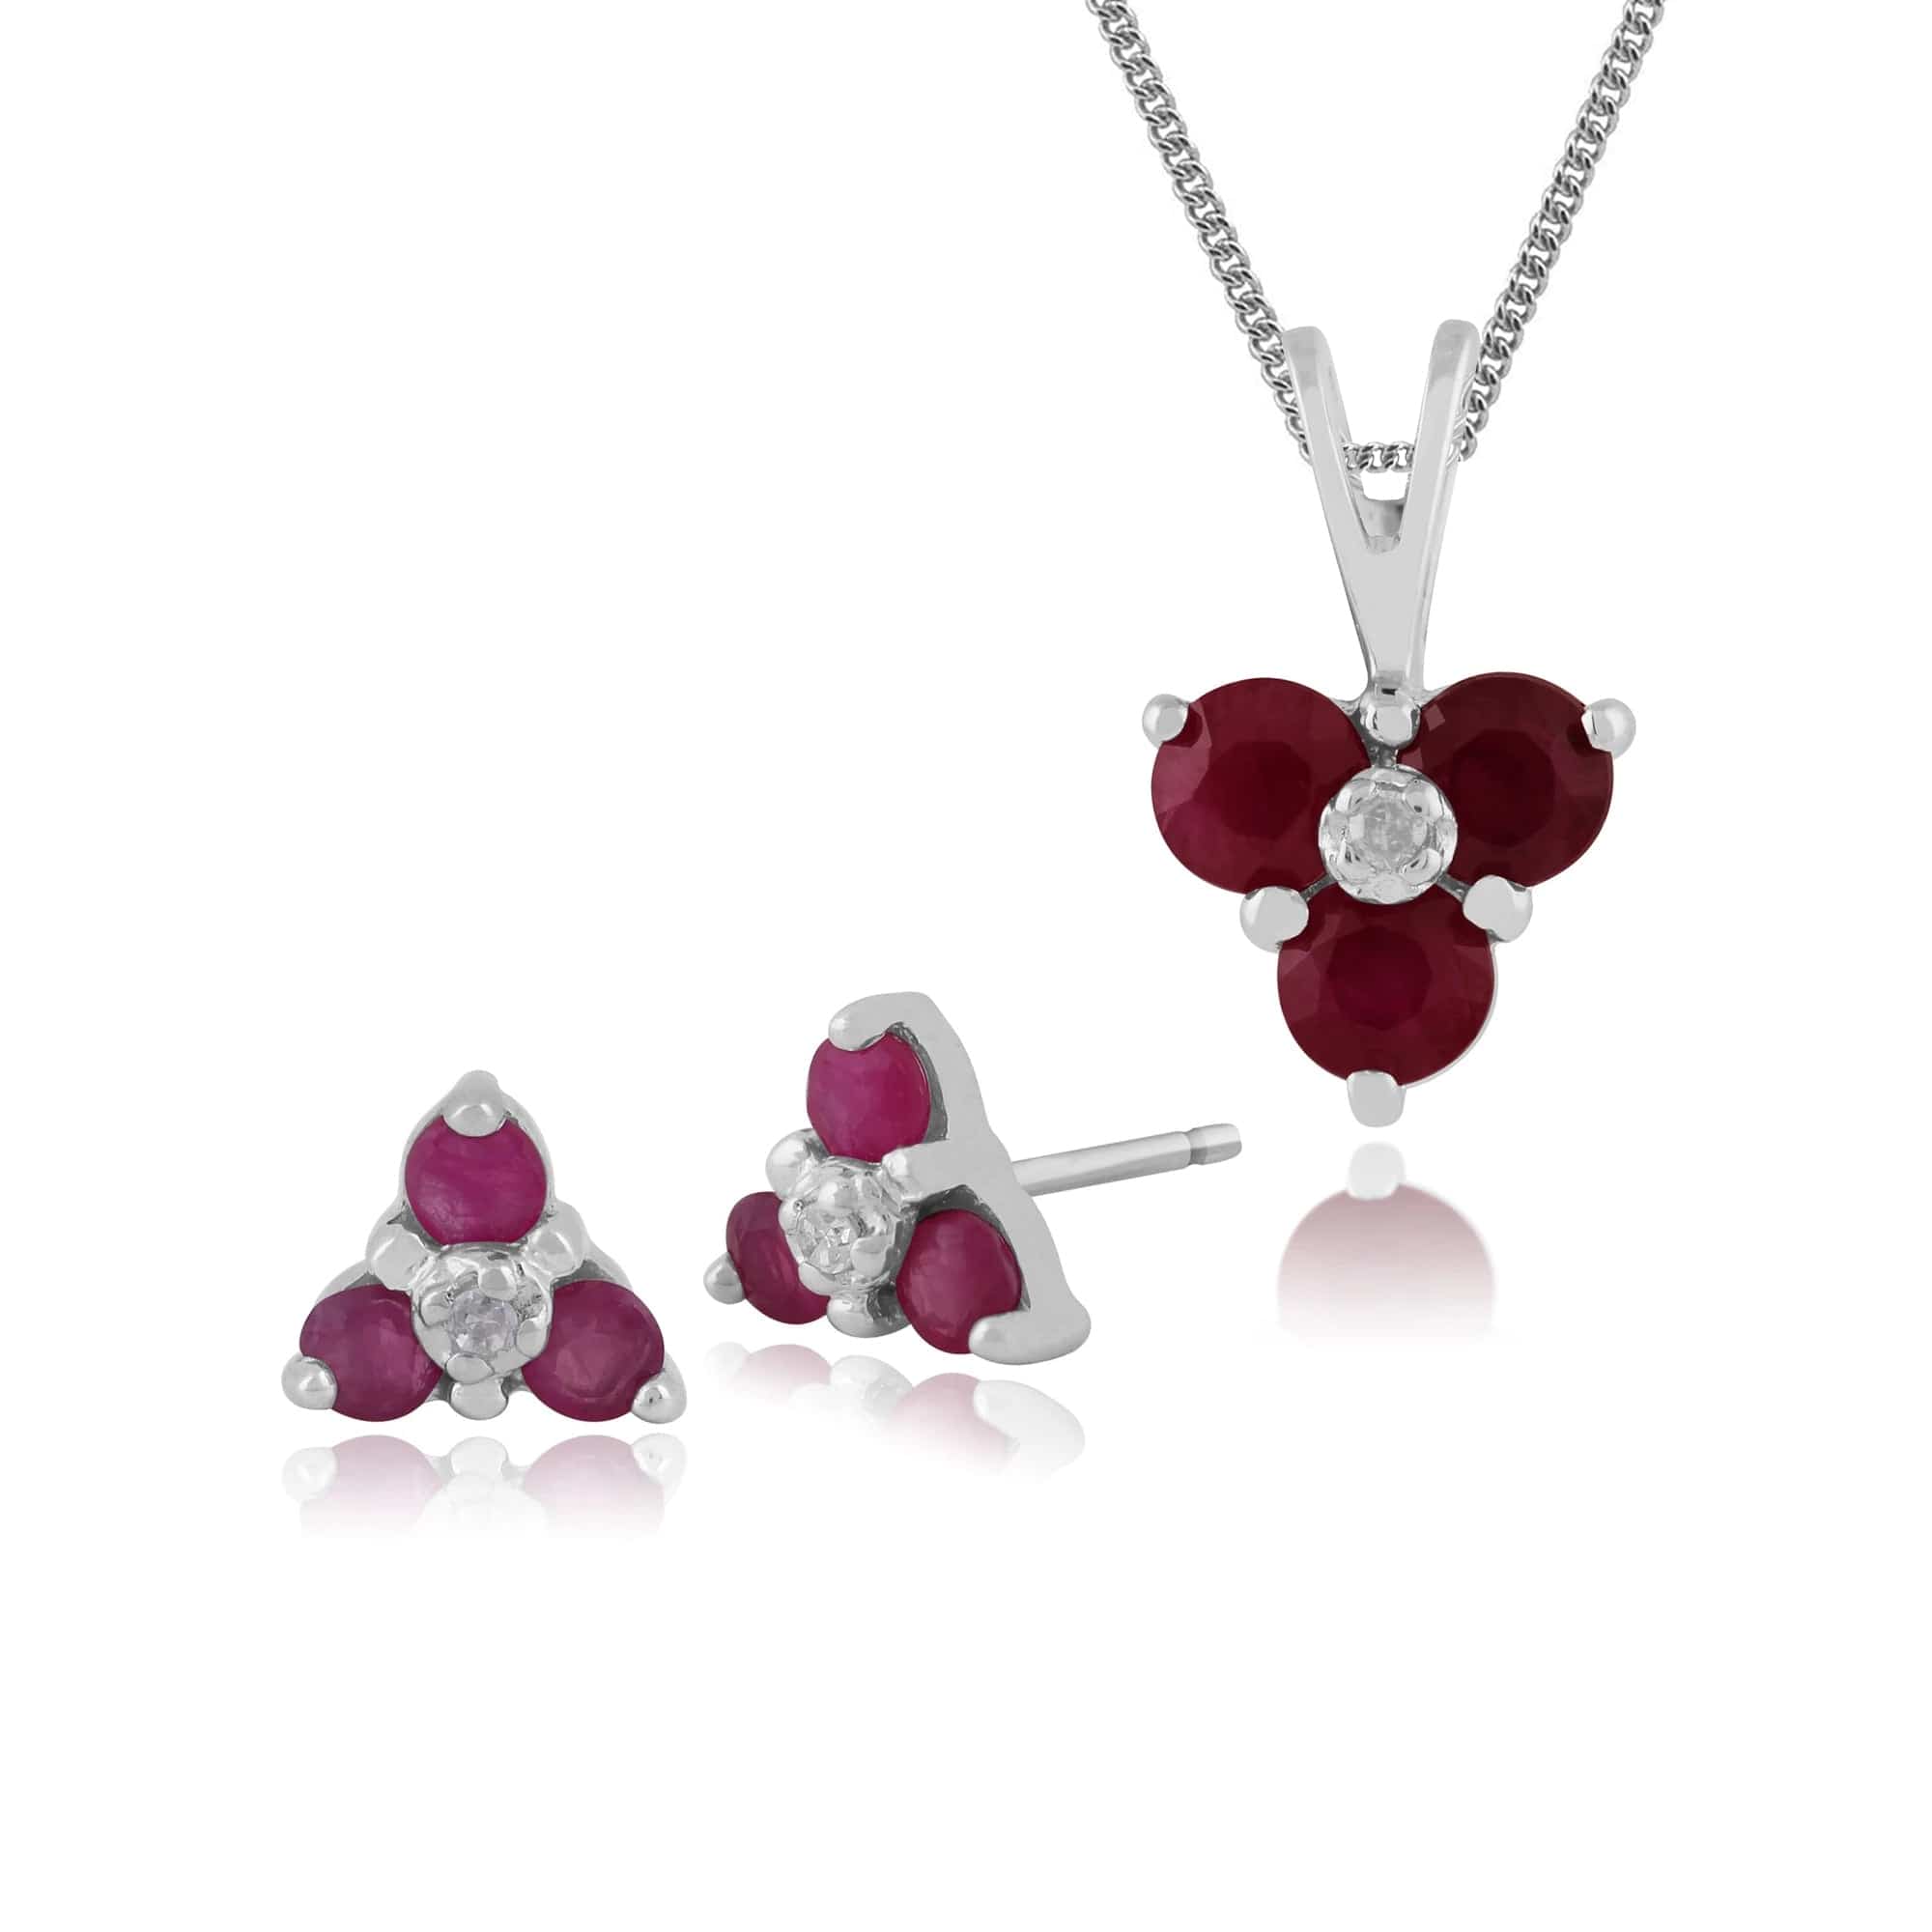 10283-25382 Floral Round Ruby & Diamond Flower Stud Earrings & Pendant Set in 9ct White Gold 1